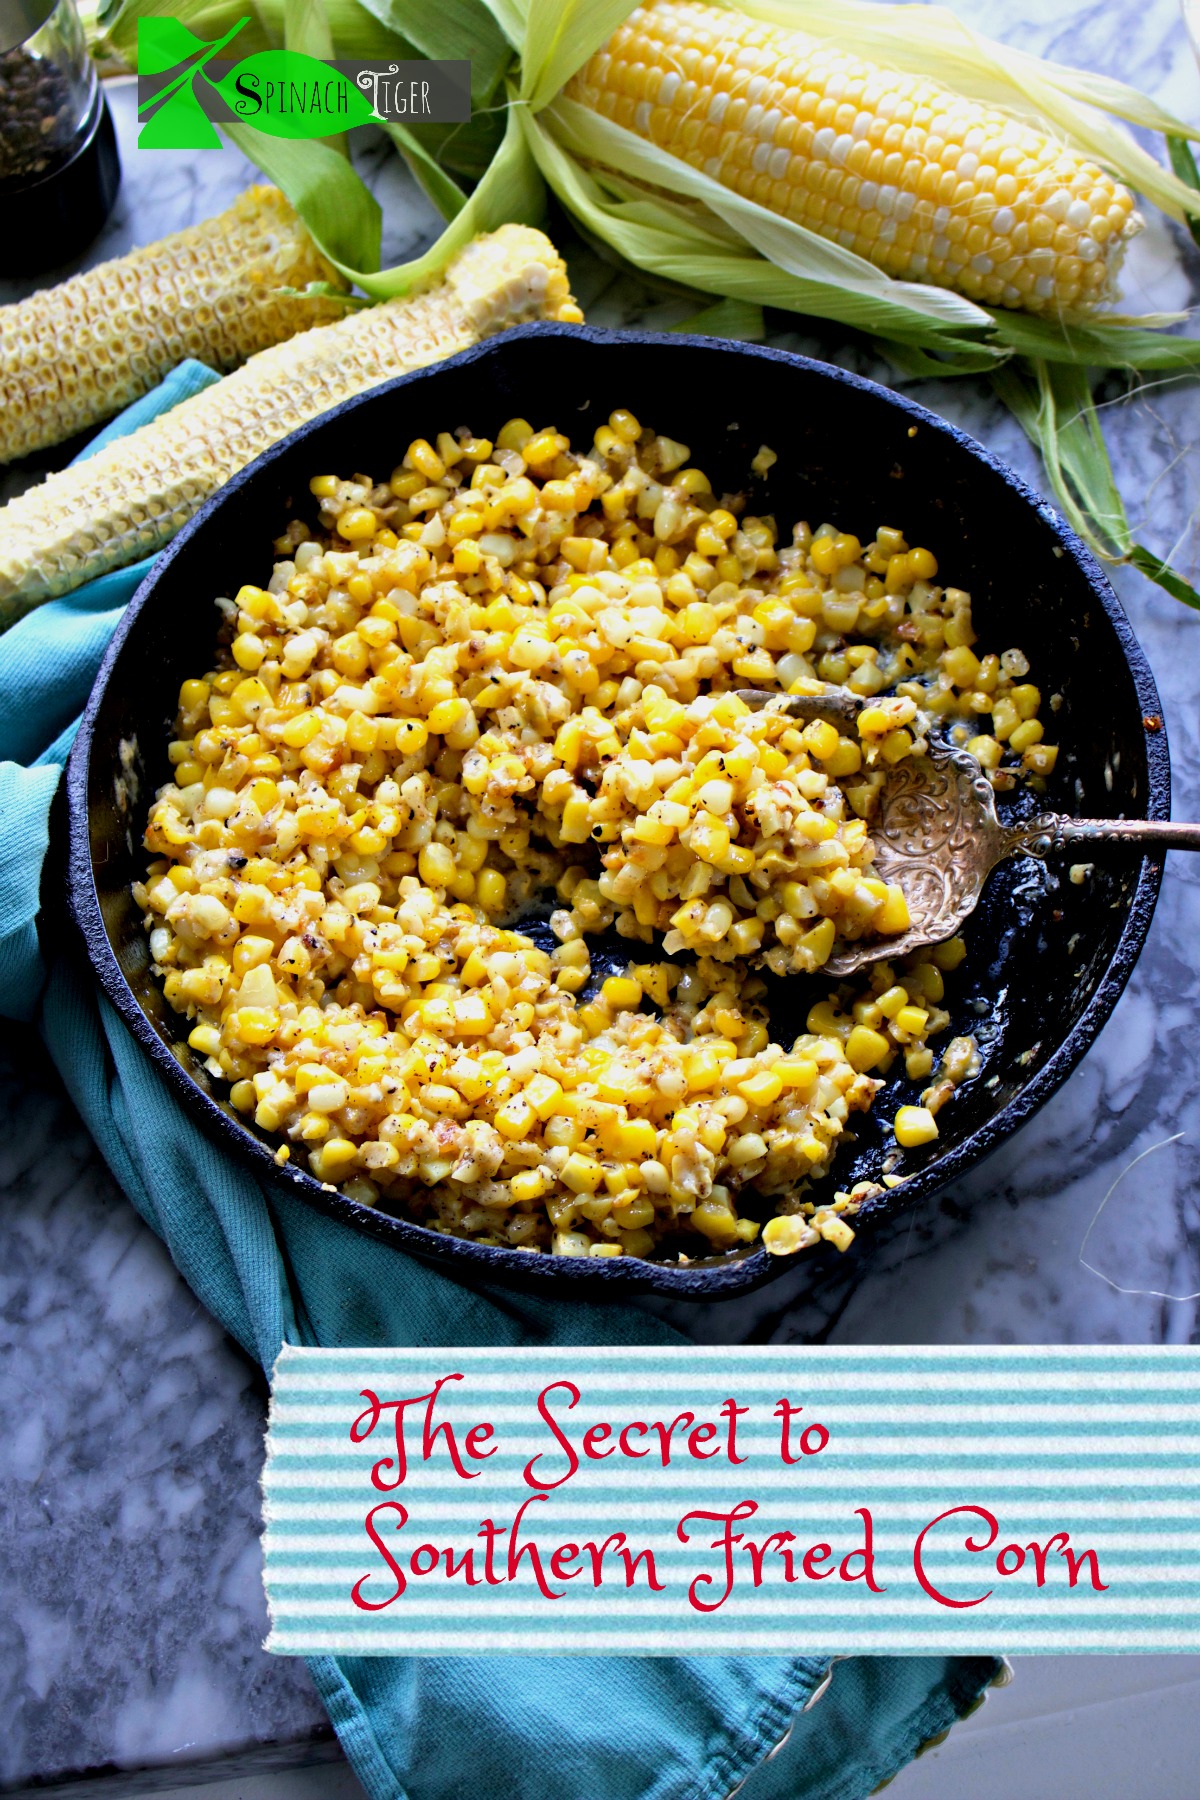 Best Southern Fried Corn Recipe from Spinach Tiger